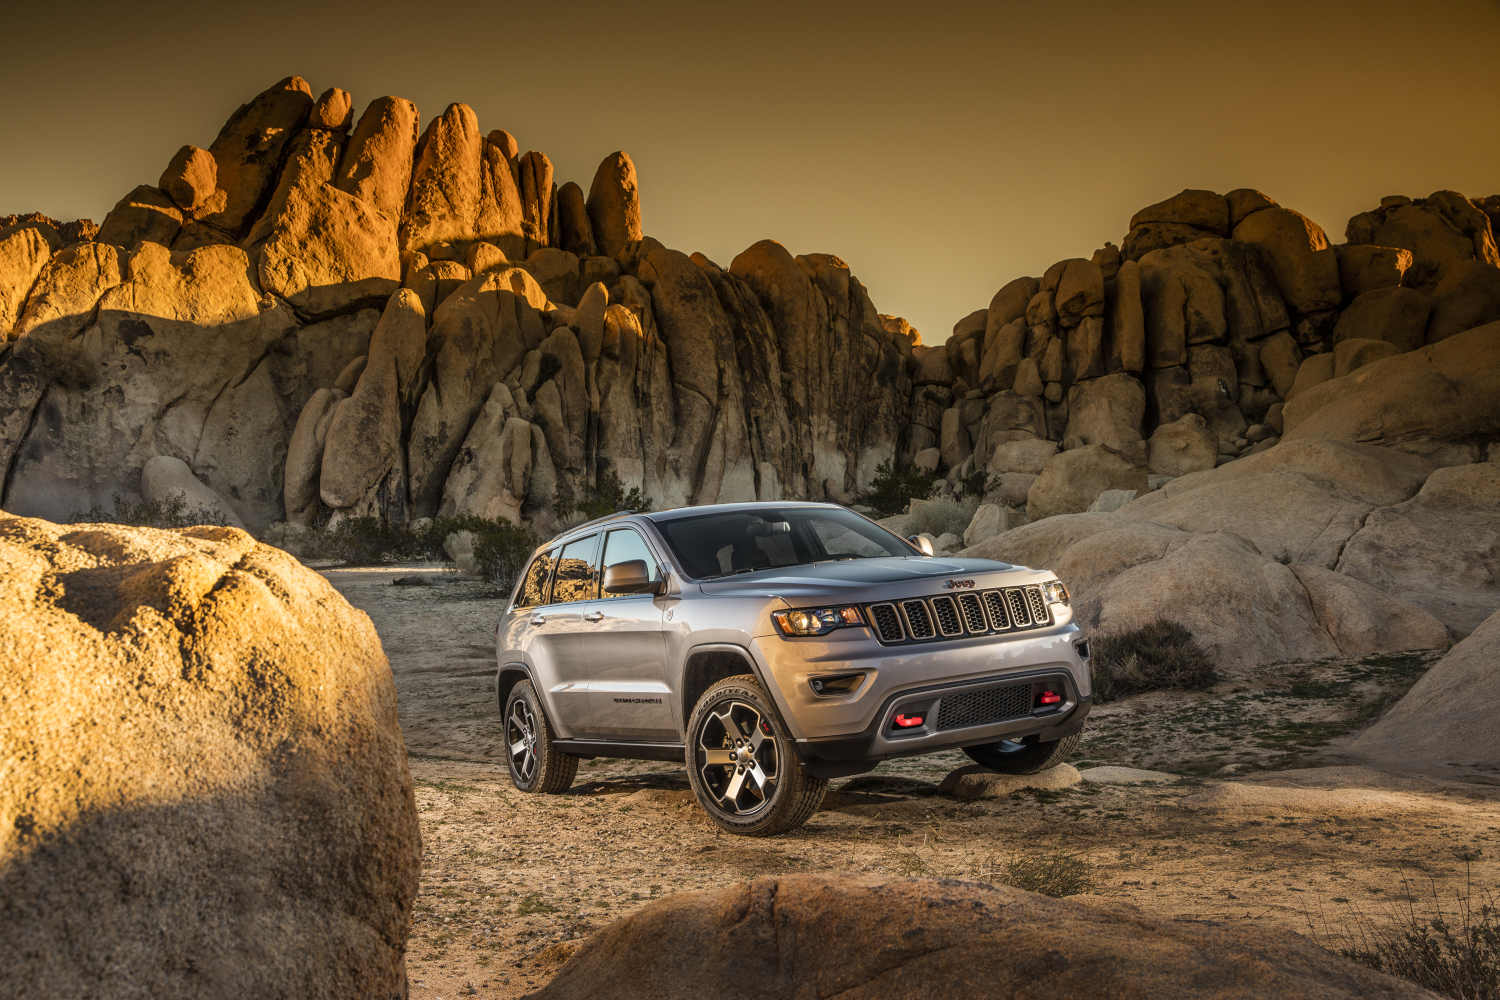 Inexpensive SUVs like the Jeep Grand Cherokee can be found in Florida